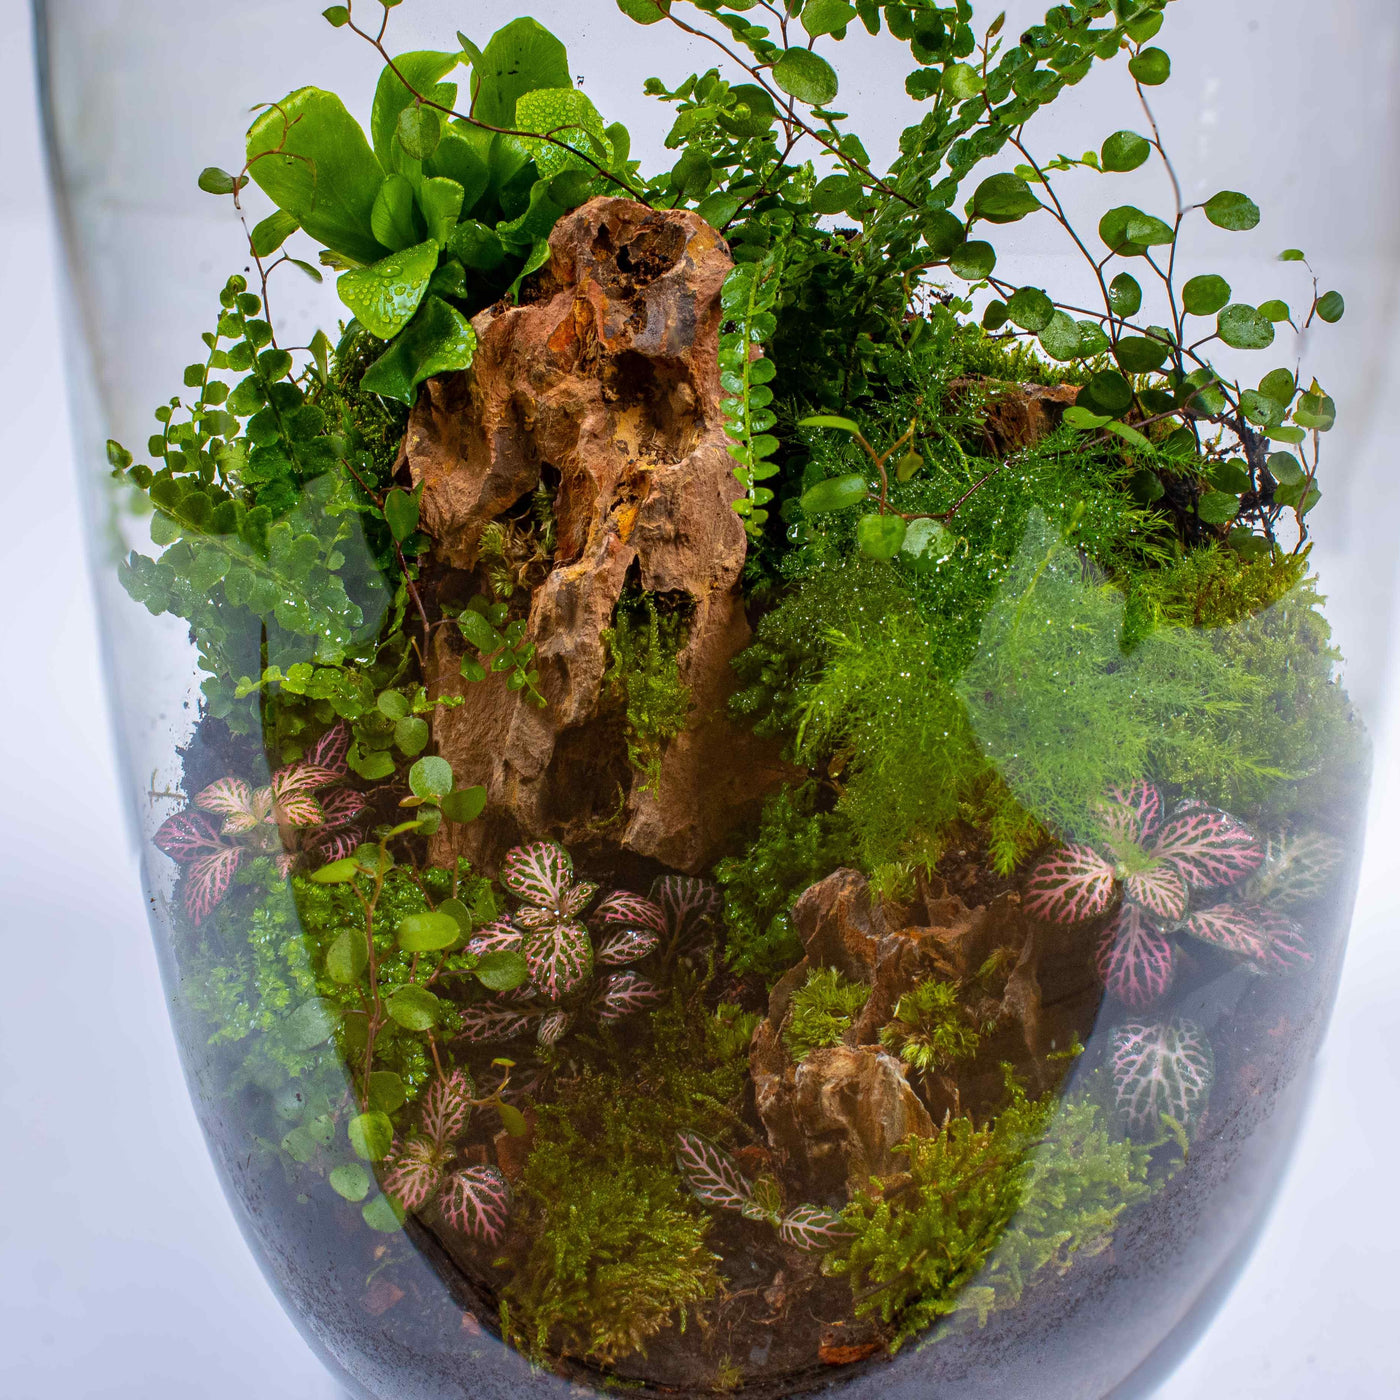 Create your miniature world with our Tall Terrarium Kit.